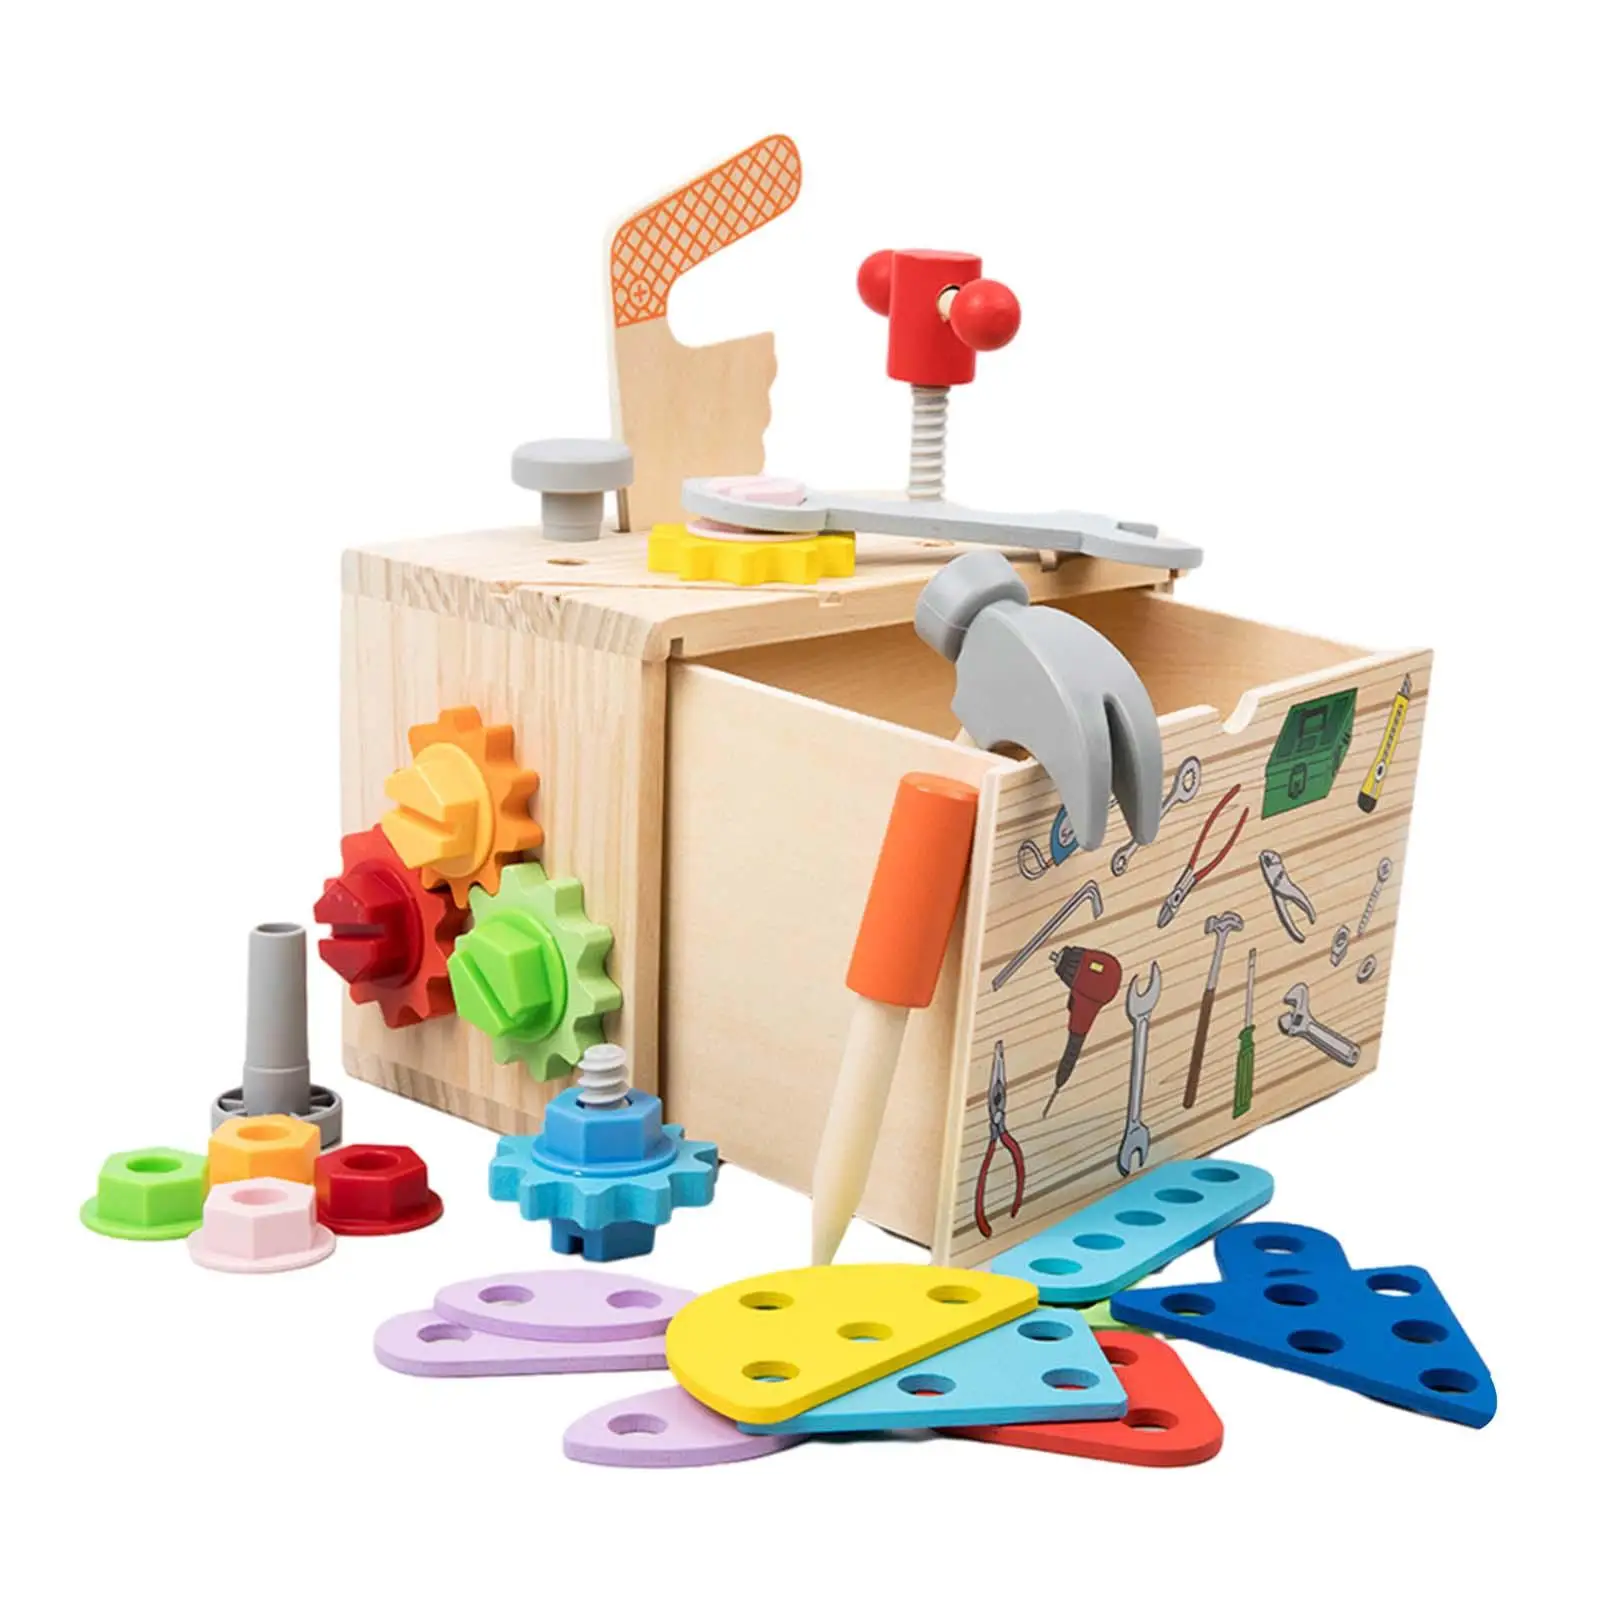 Wooden Toolbox Toy Role Playing Fine Motor Skill Kids Play Tool Set for Holiday Birthday Girls Boy 2 3 4 5 Years Old Festivals